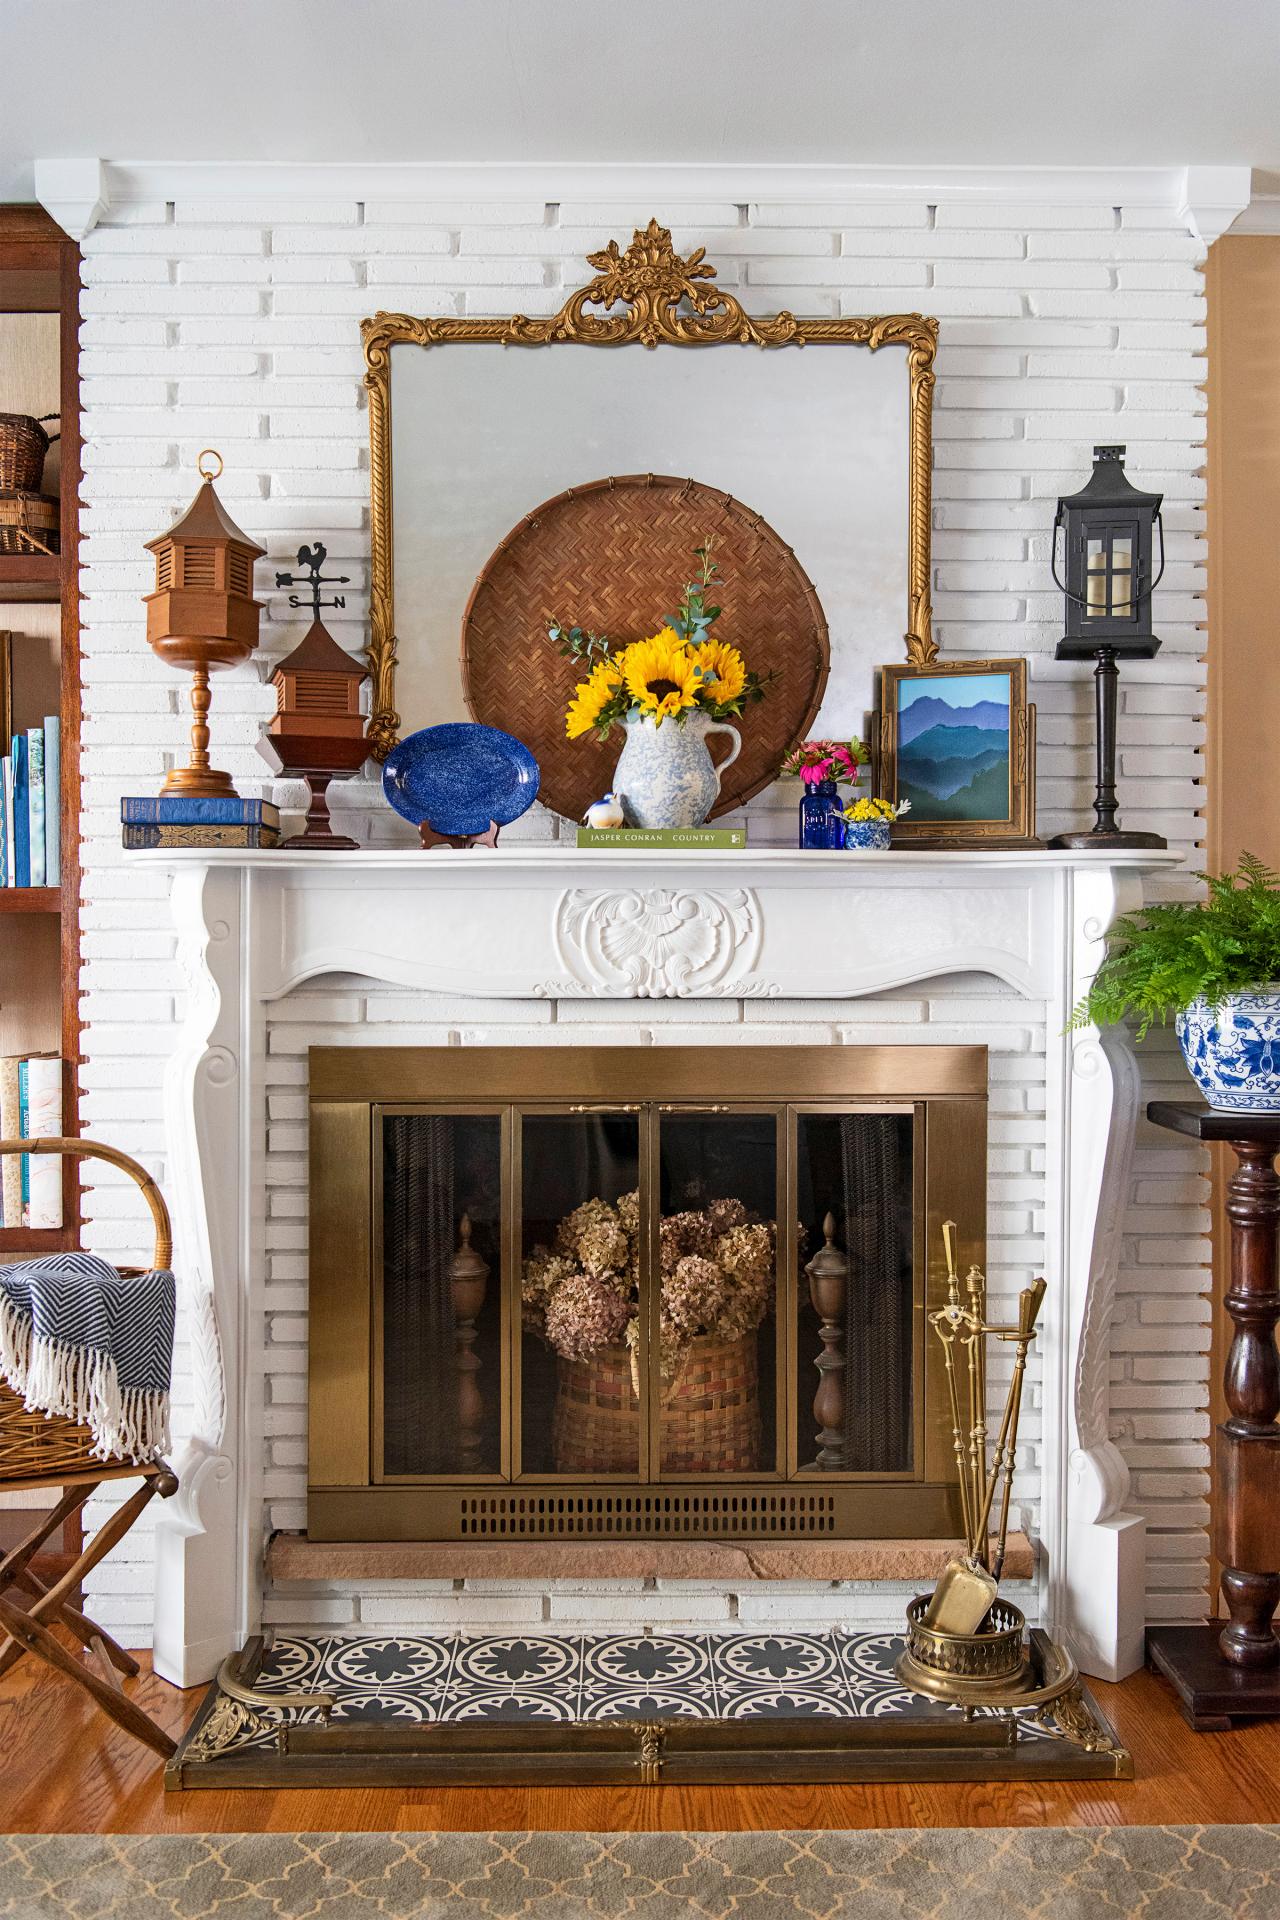 40 Ways to Decorate Your Mantel | How to Decorate a Fireplace ...